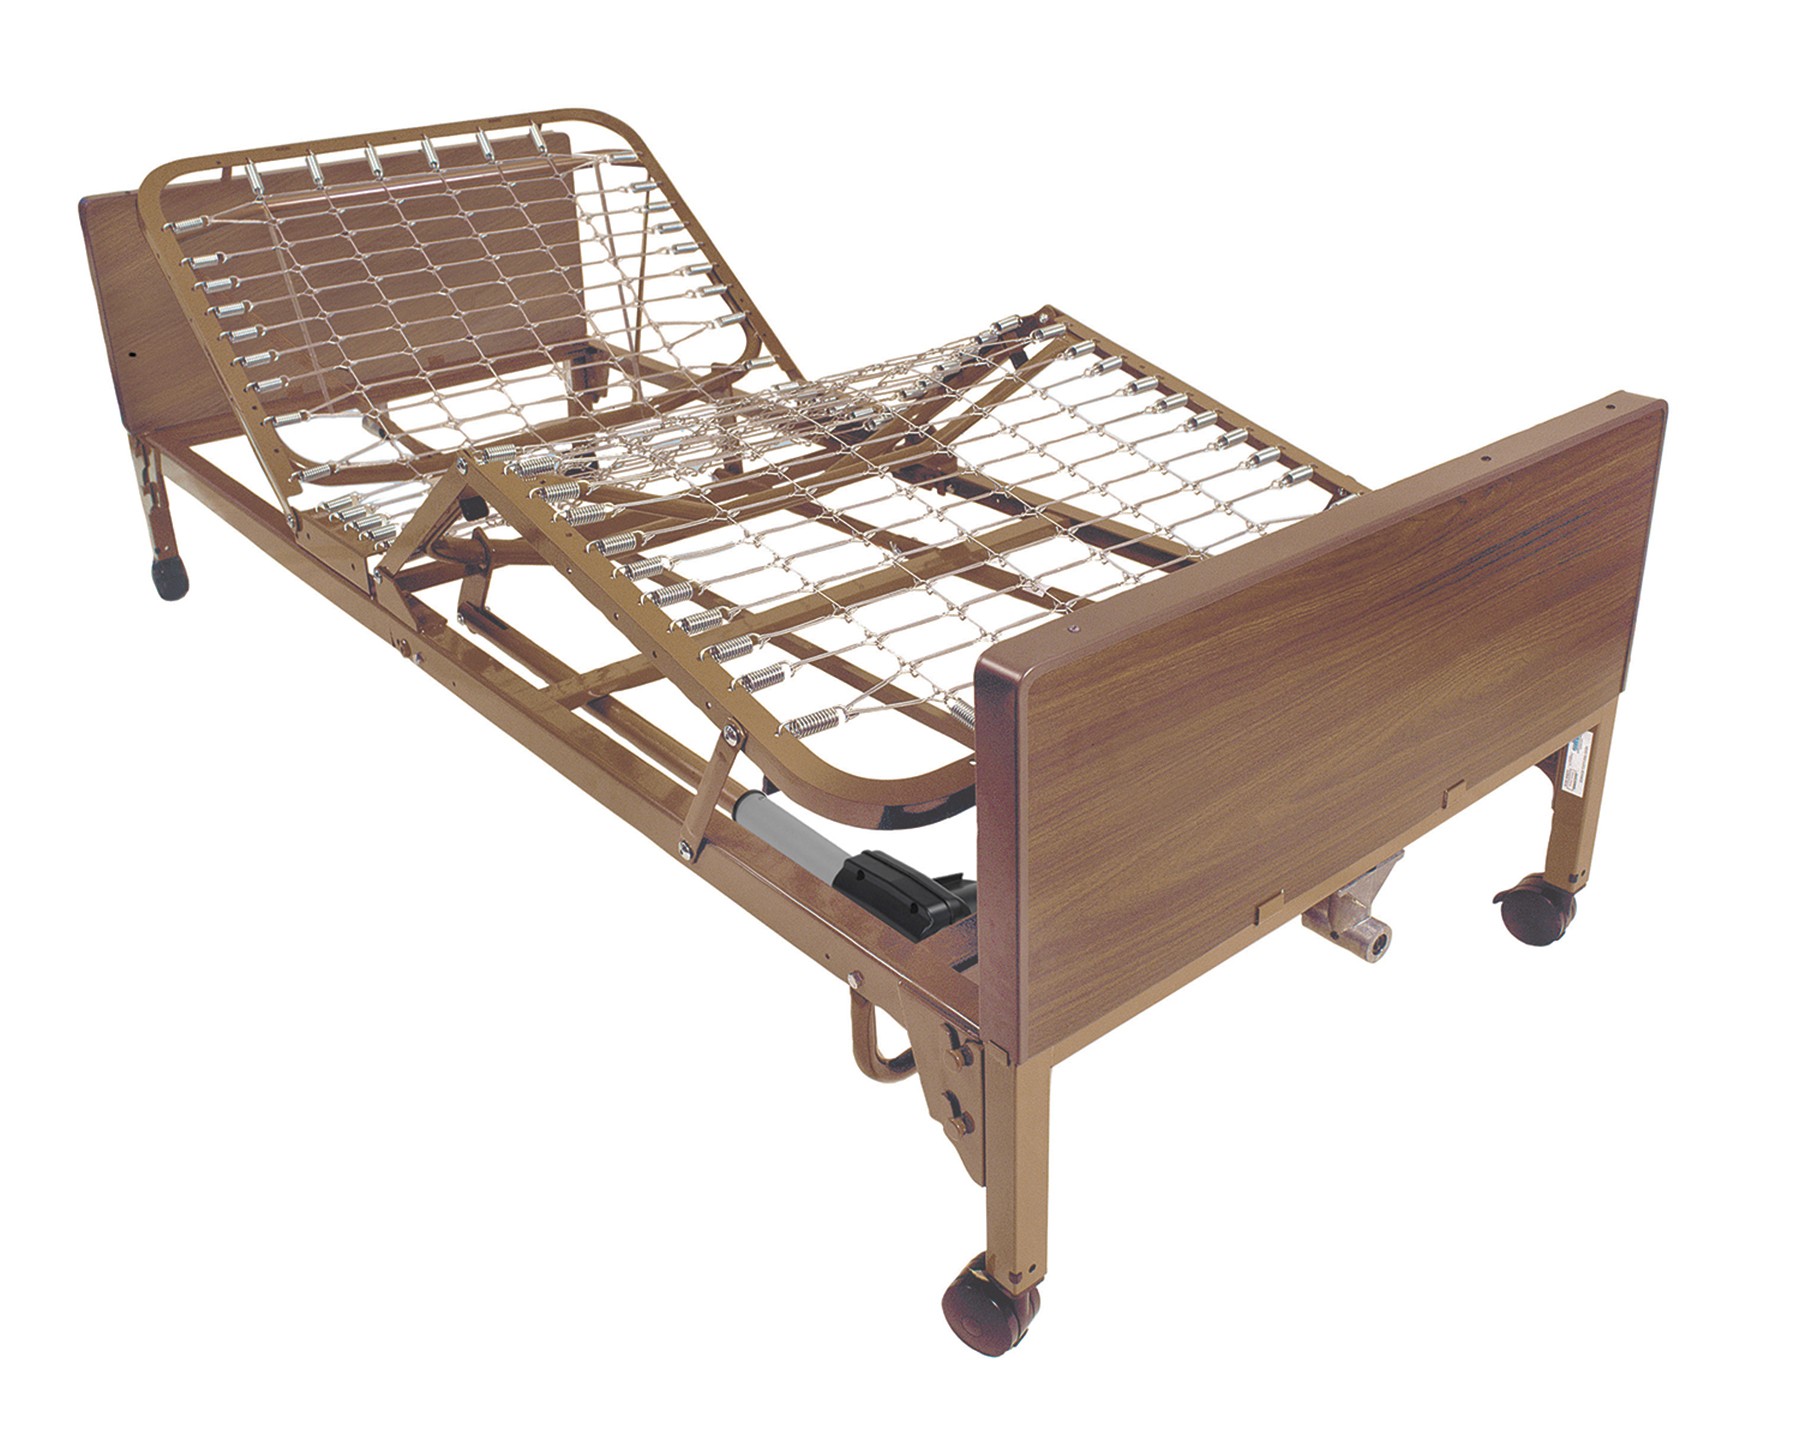 Full electric VS manual hand crank hospital beds feature - Anyang Top  Medical: Hospital Bed Supplier